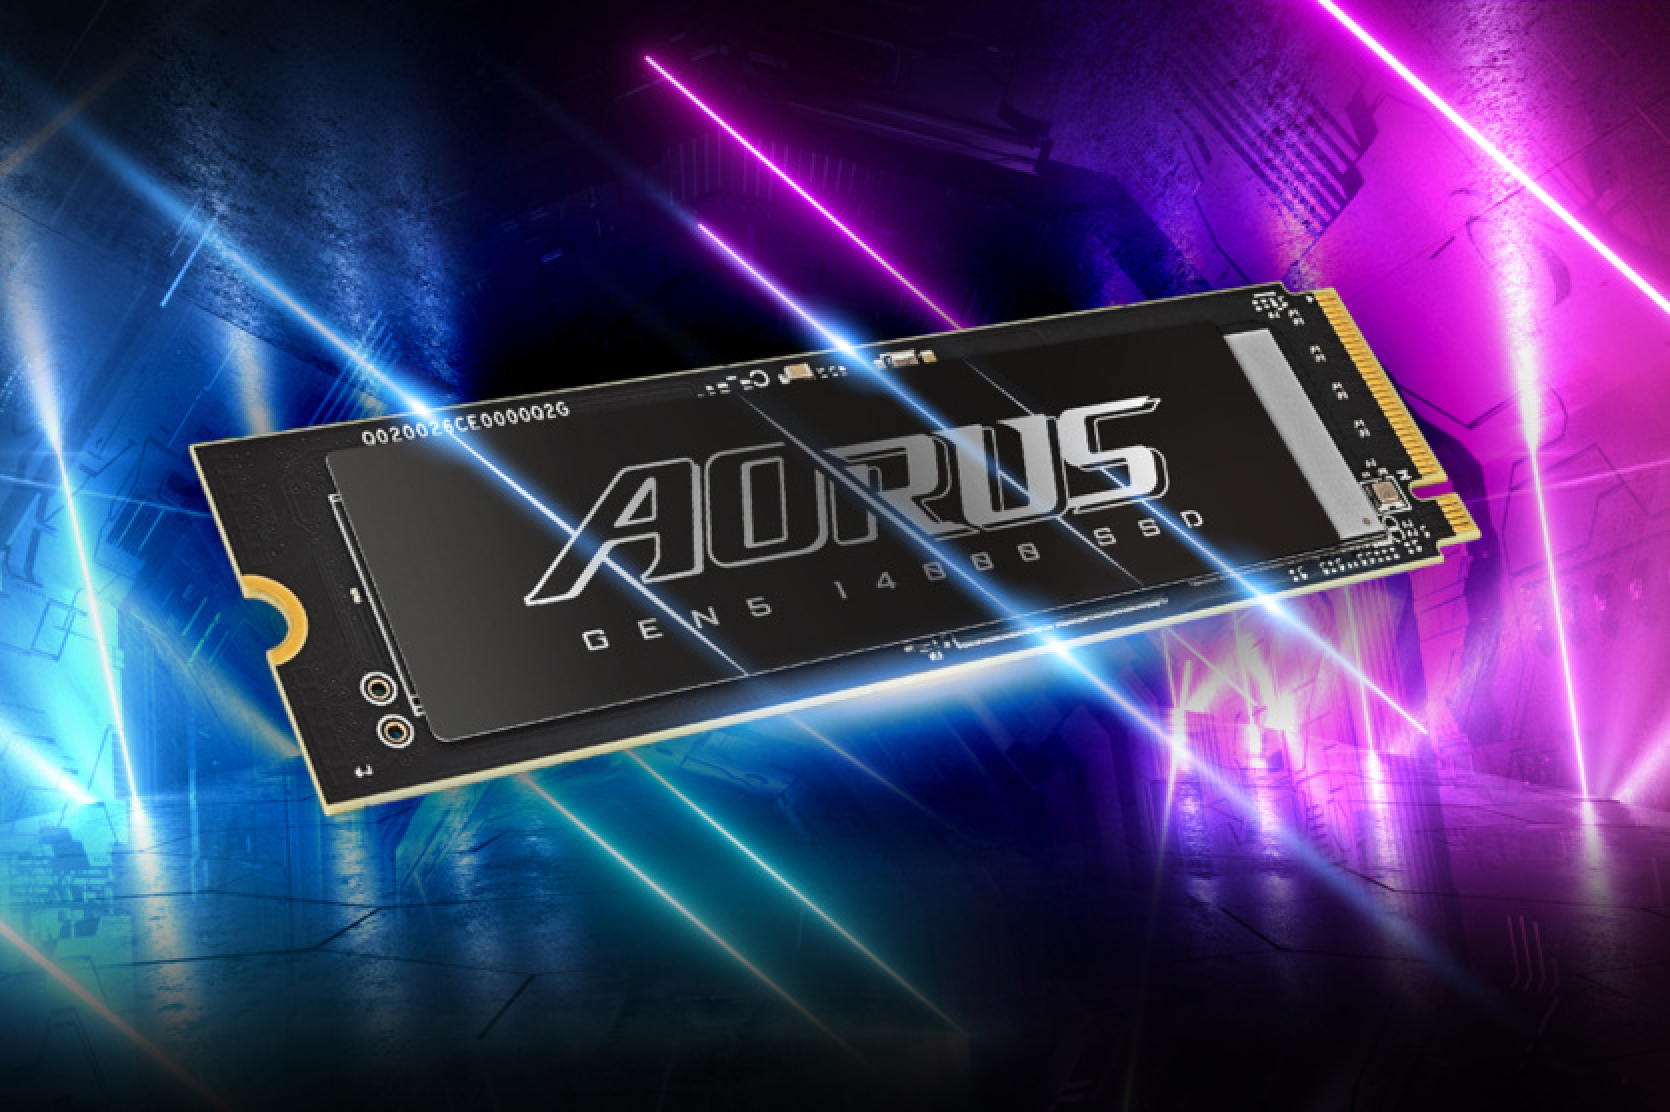 Gigabyte introduced the Aorus Gen5 14000 SSD for M.2 PCIe 5.0 - up to 14,500 MB/s, 3D-TLC NAND, integrated DDR4 cache